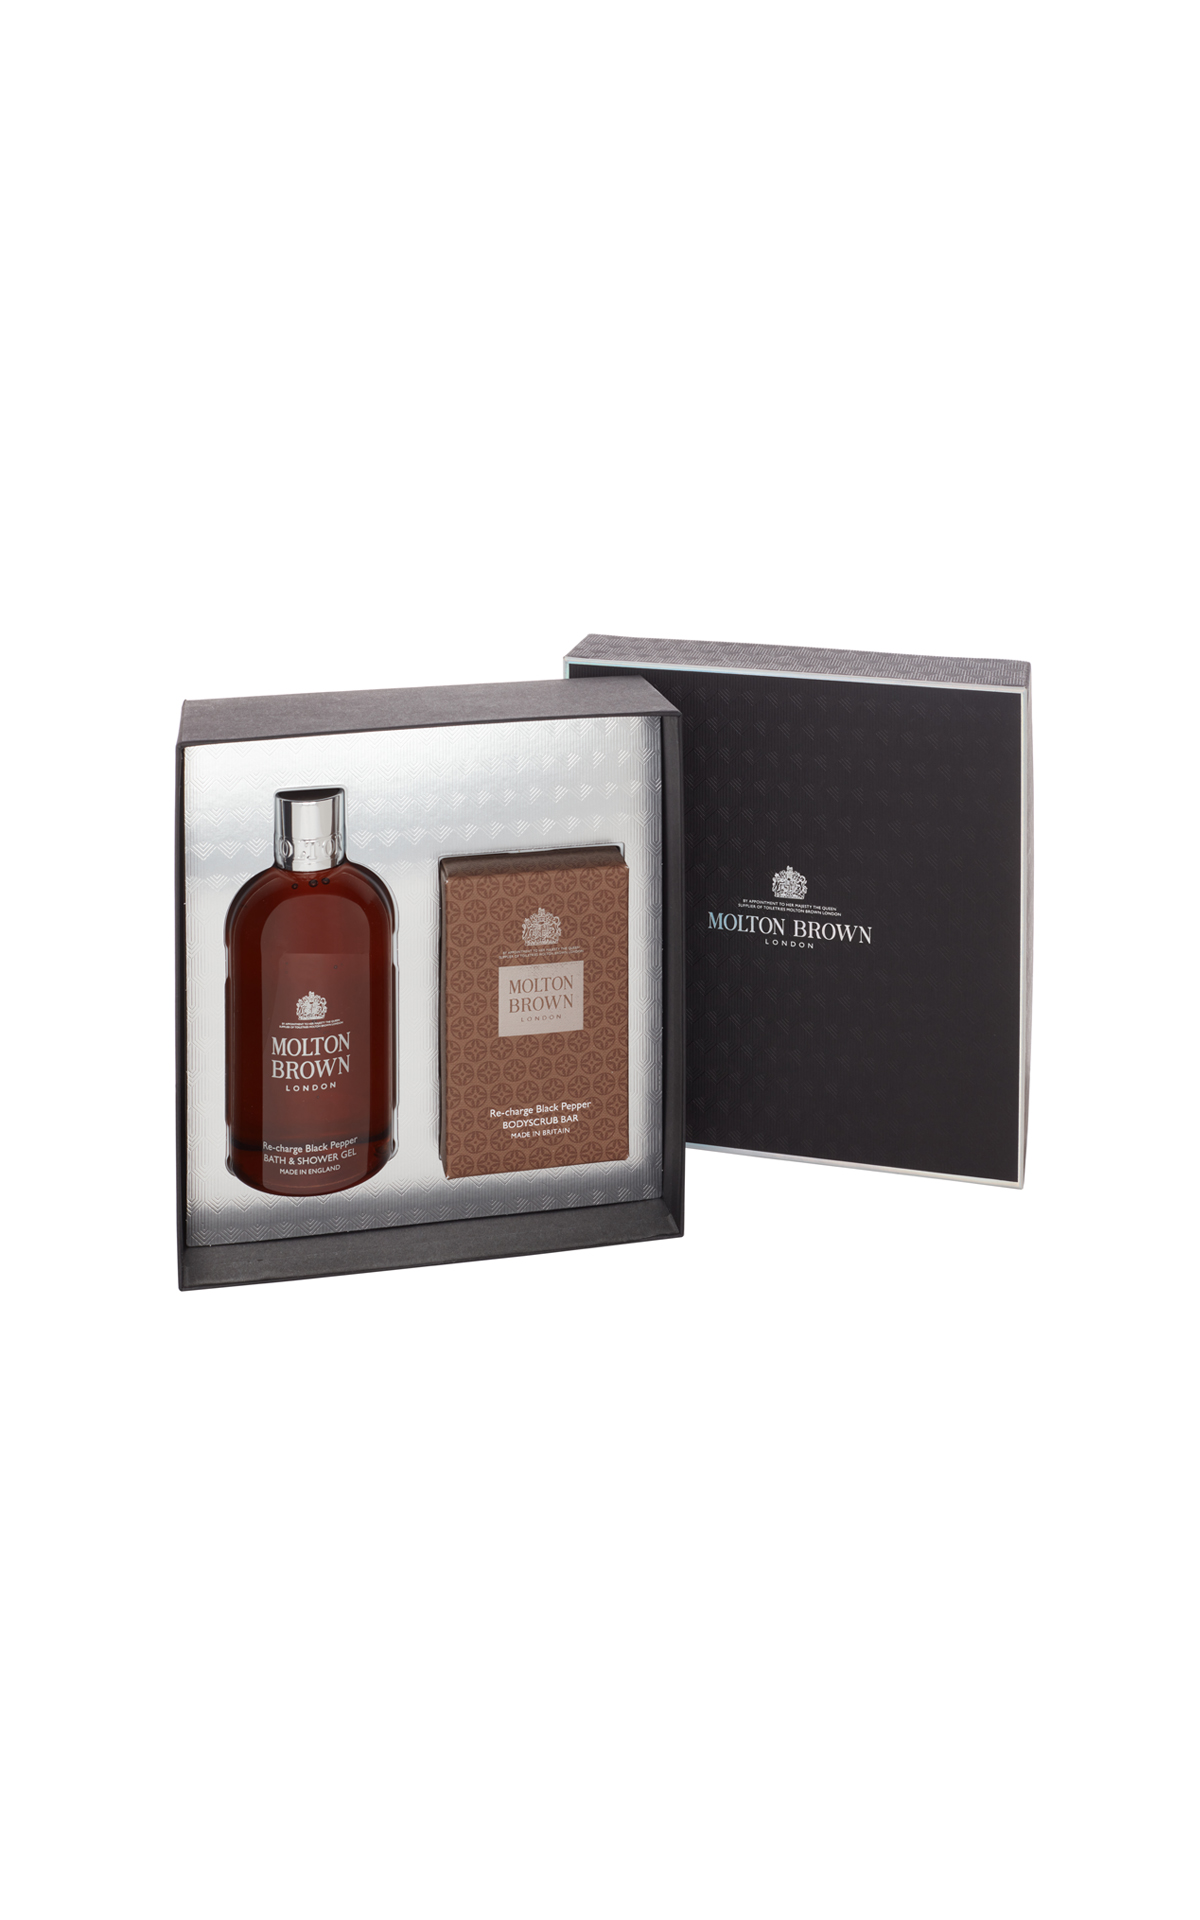 Molton Brown Black pepper shaving duo from Bicester Village